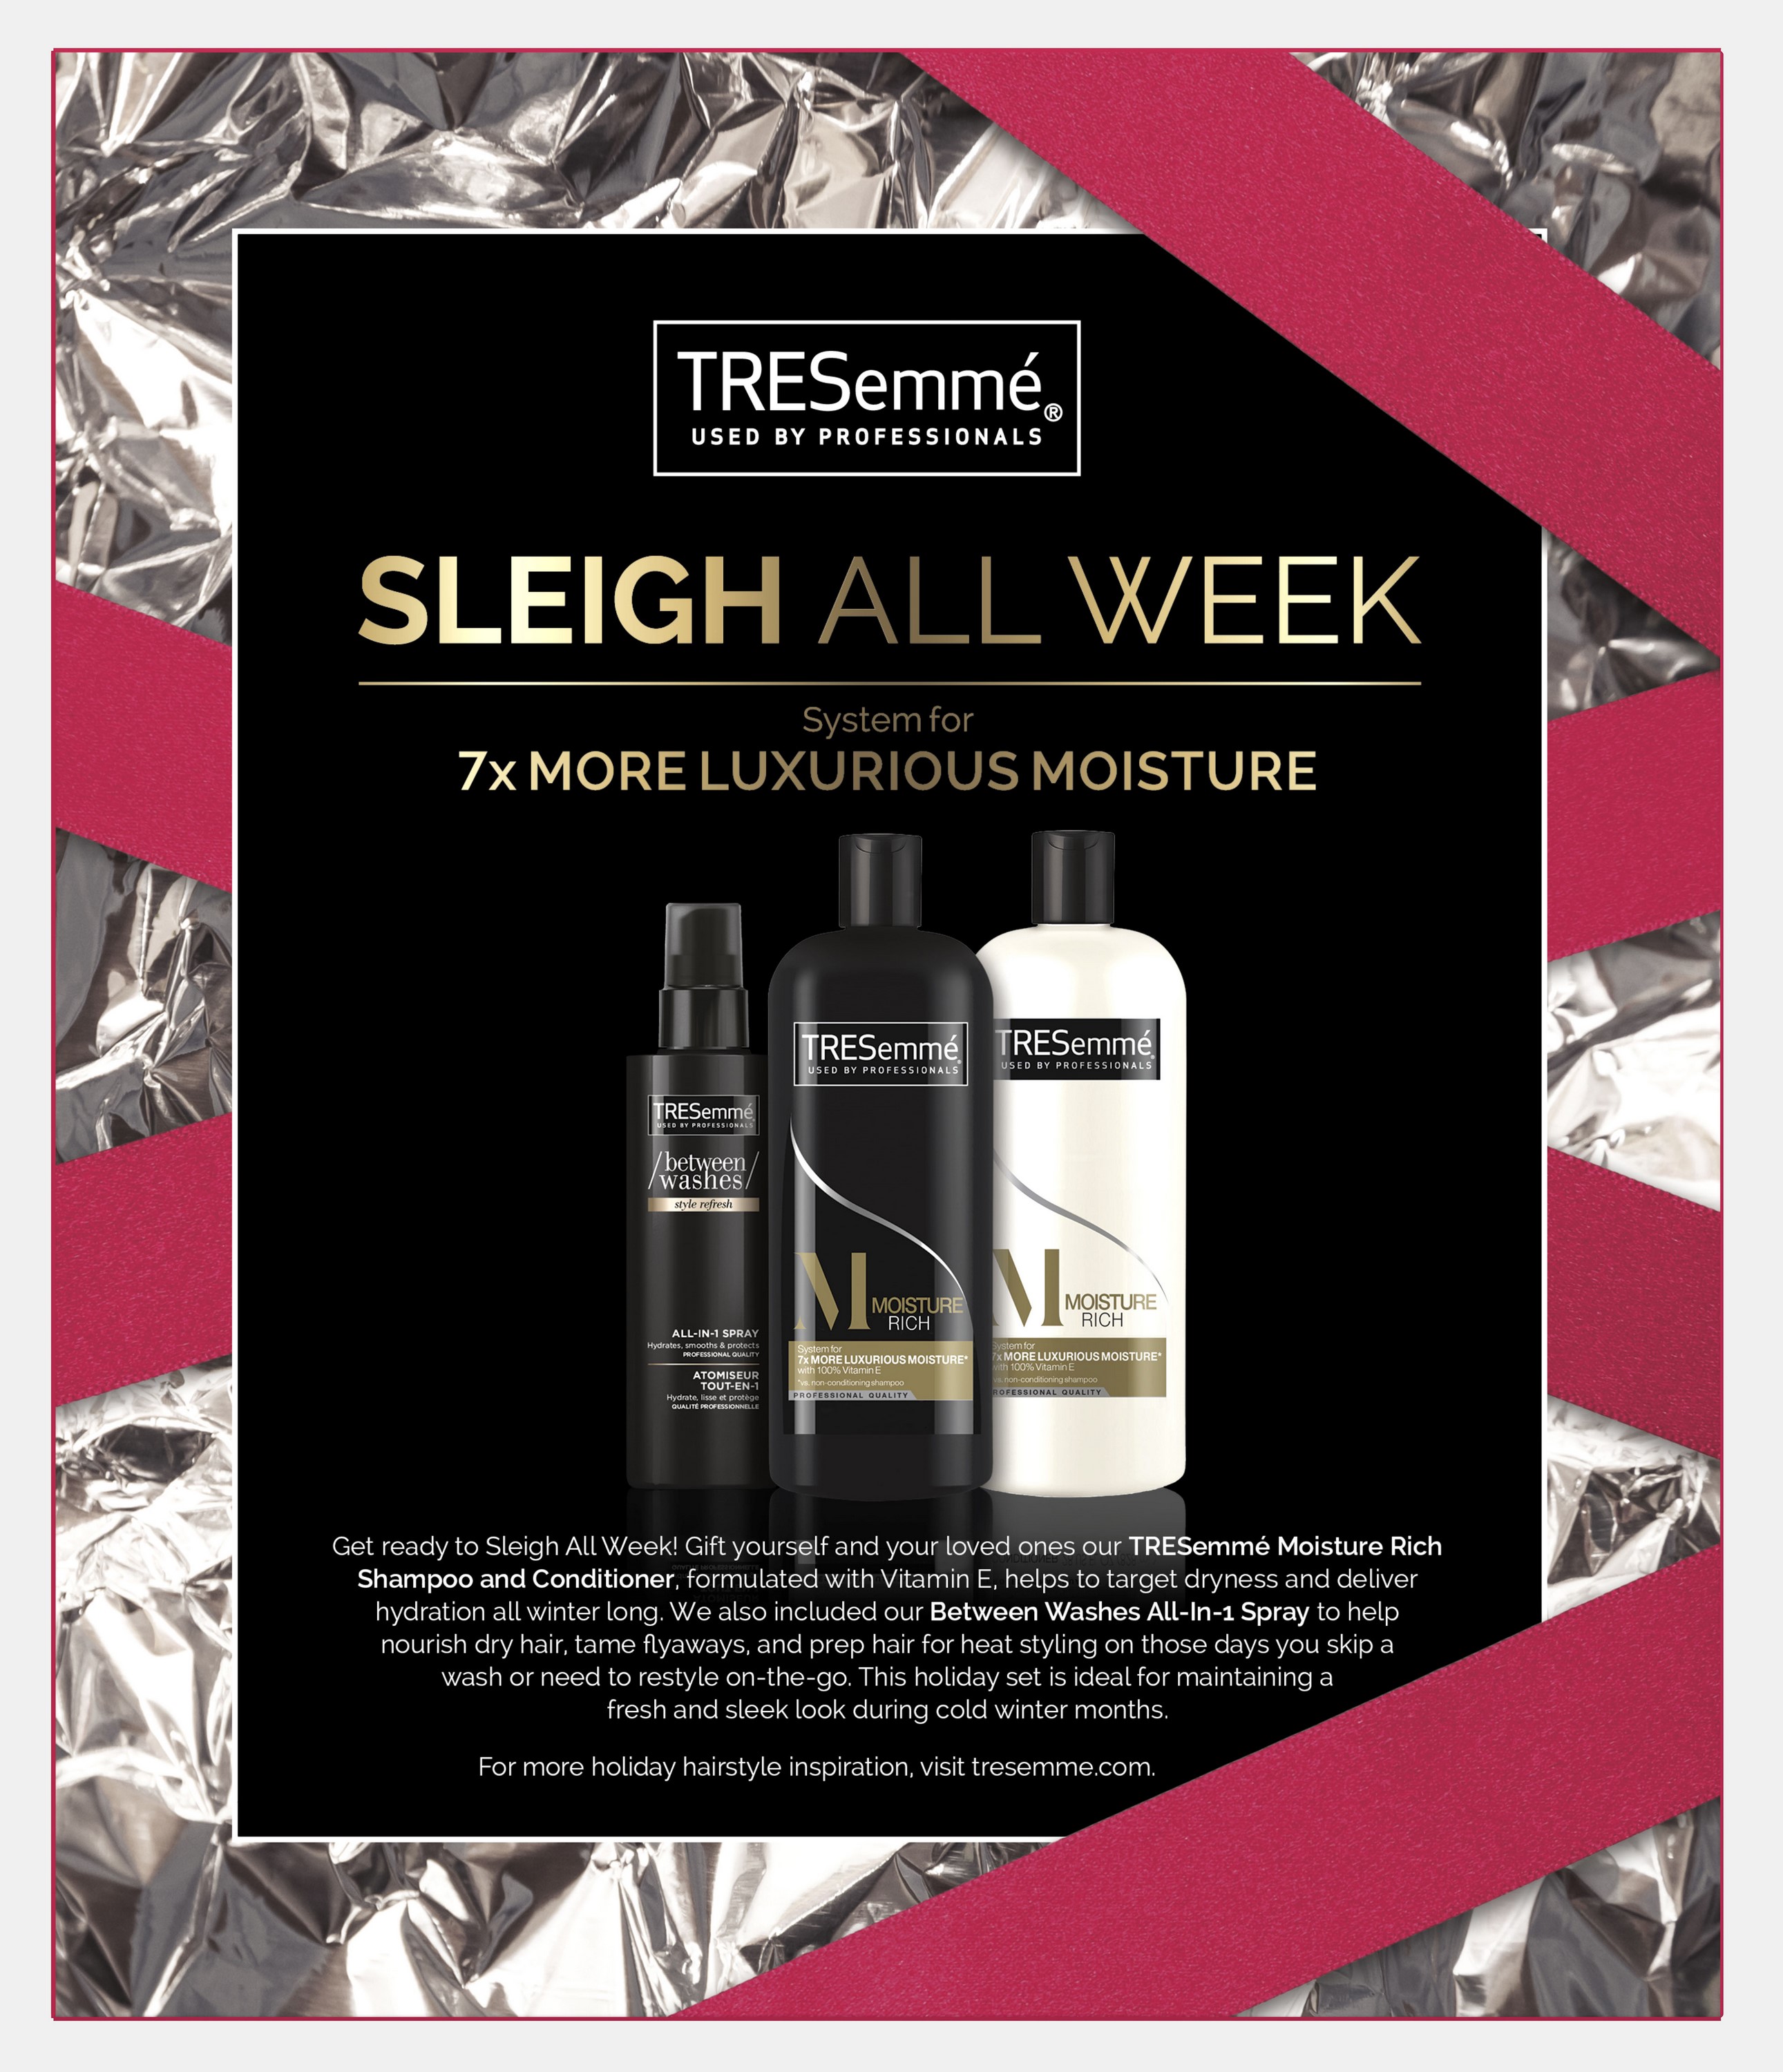 ($13 Value) TRESemme 3-Piece Moisture Rich Gift Set with Shampoo, Conditioner, and All-In-One Styling Spray - image 4 of 10